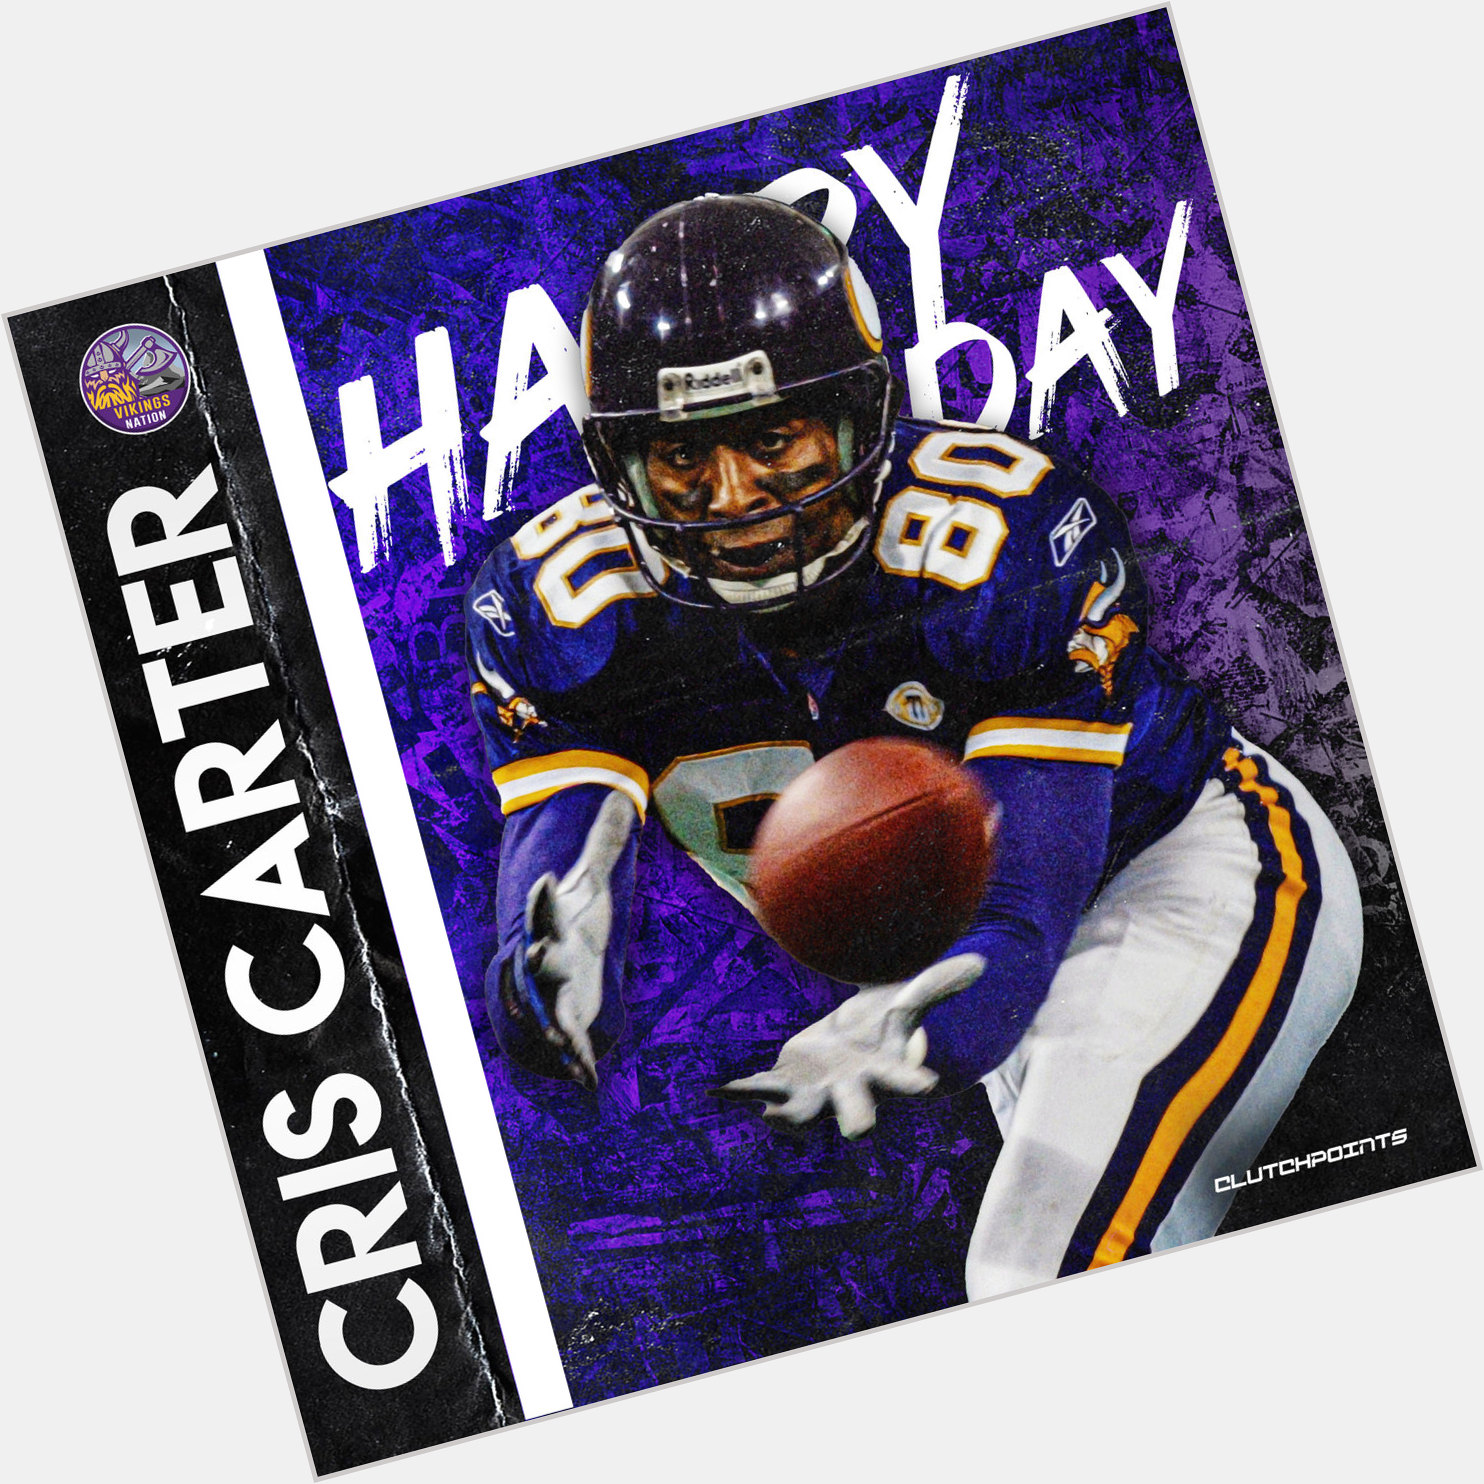 Join Vikings Nation in greeting Hall of Famer and 8x Pro Bowler, Cris Carter, a happy 56th birthday!  